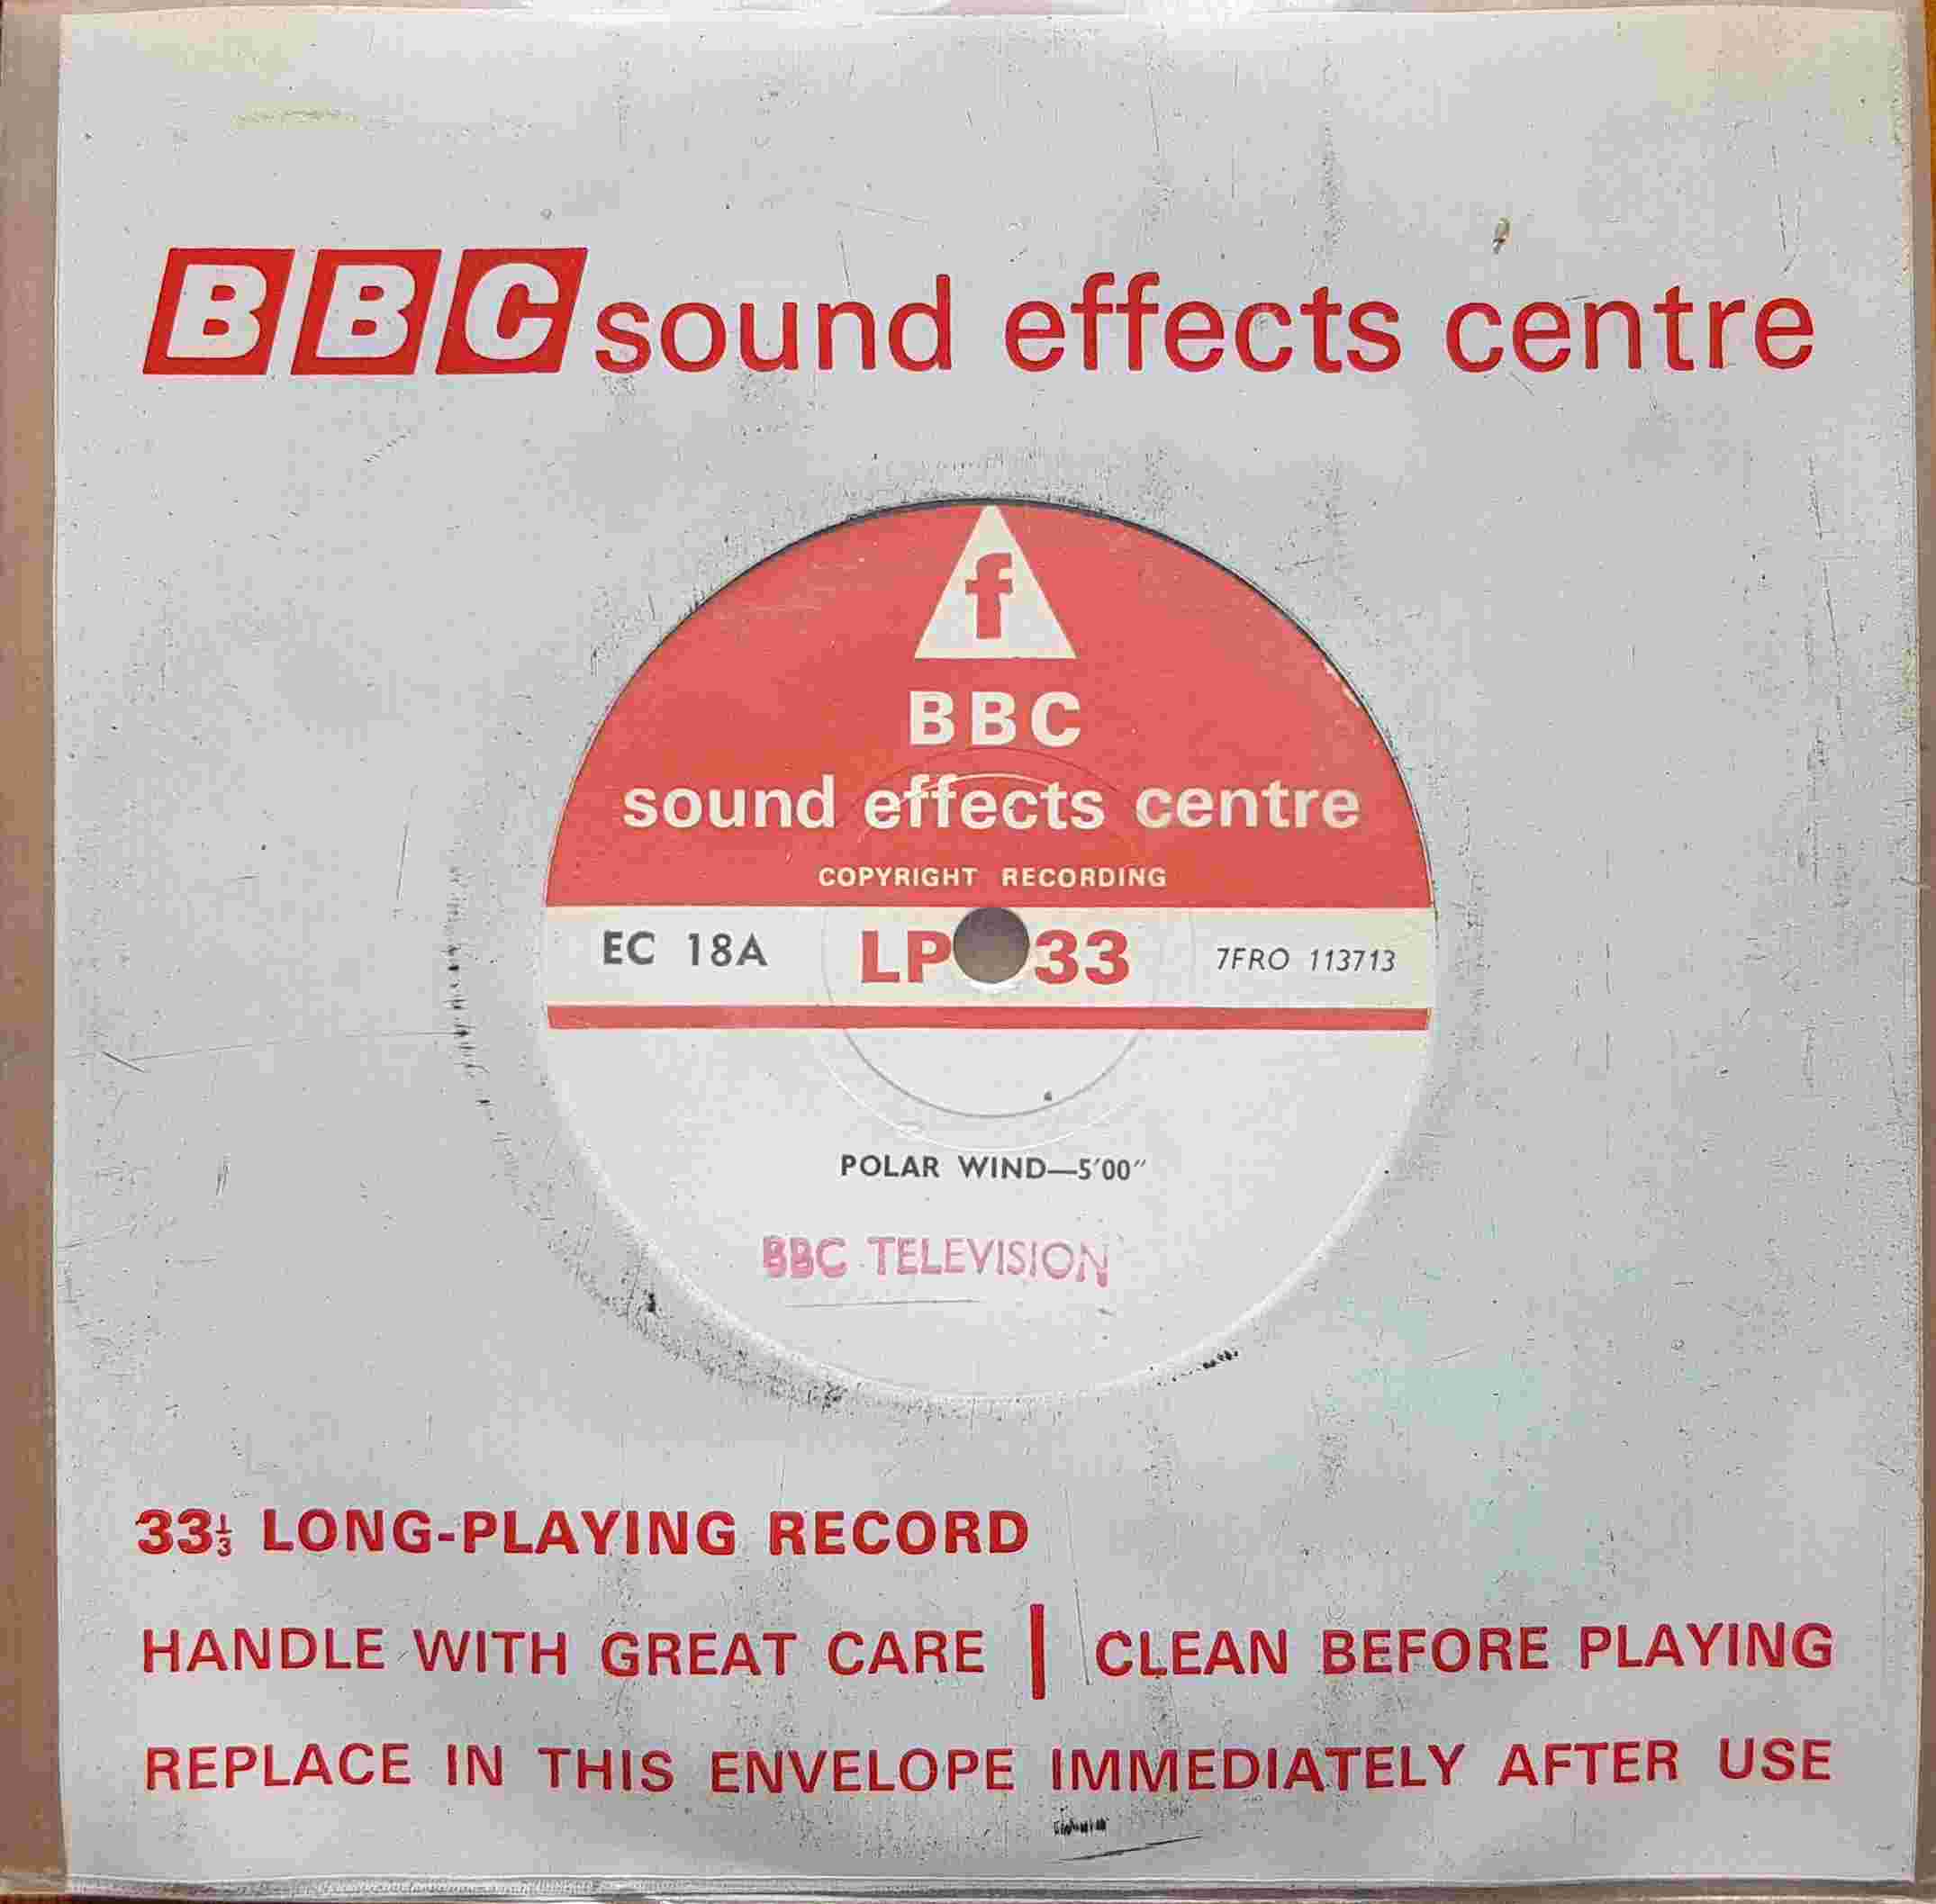 Picture of EC 18A Wind by artist Not registered from the BBC singles - Records and Tapes library